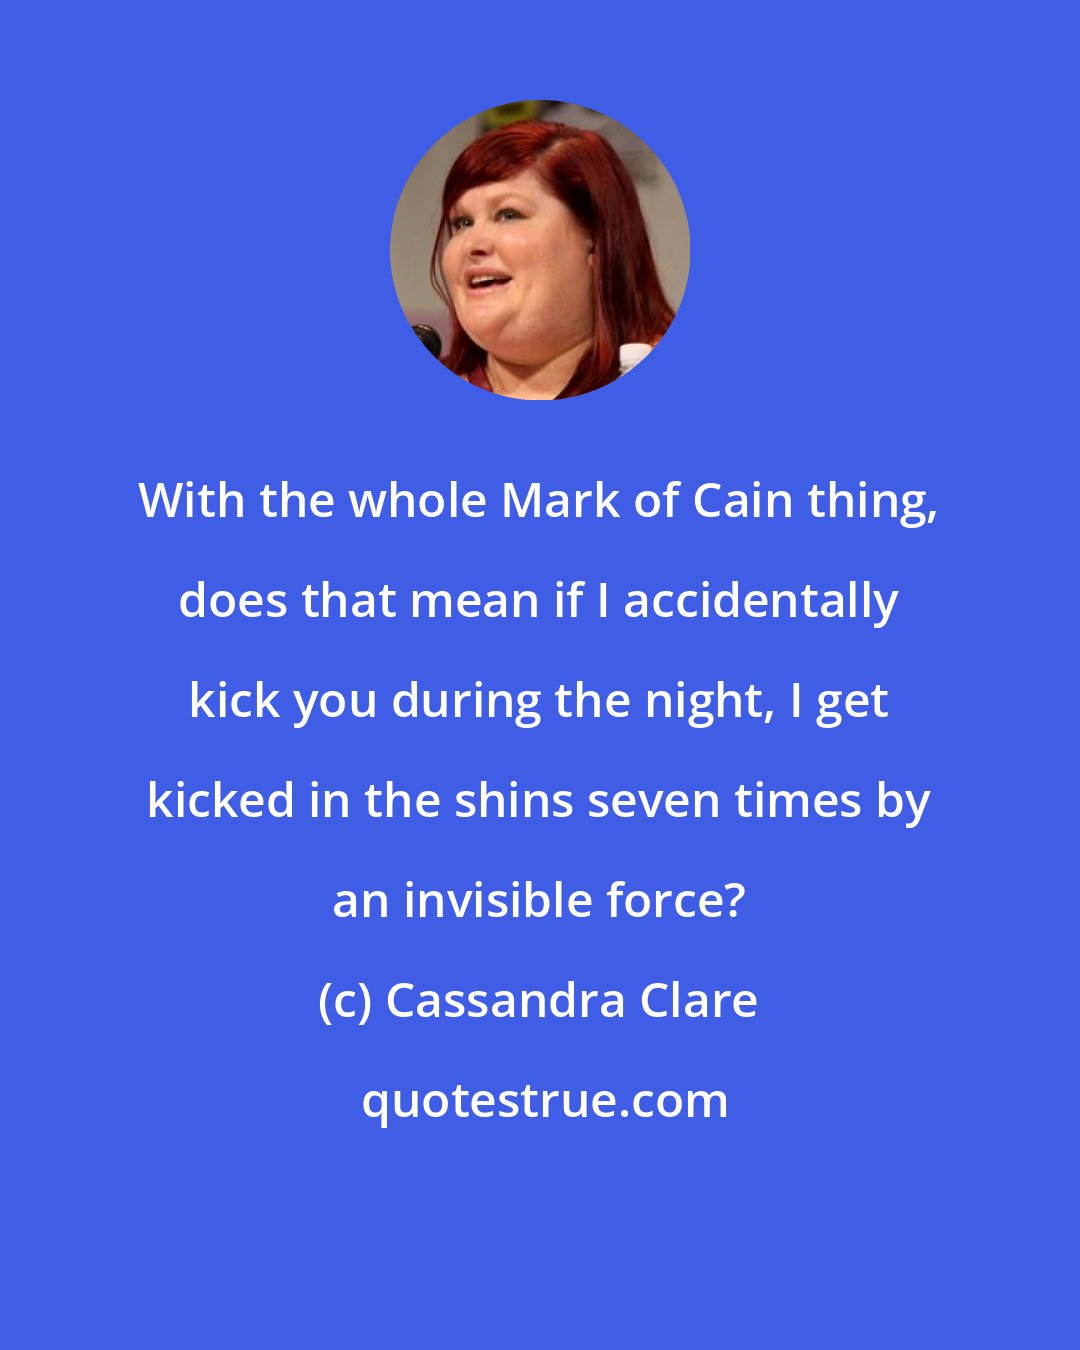 Cassandra Clare: With the whole Mark of Cain thing, does that mean if I accidentally kick you during the night, I get kicked in the shins seven times by an invisible force?